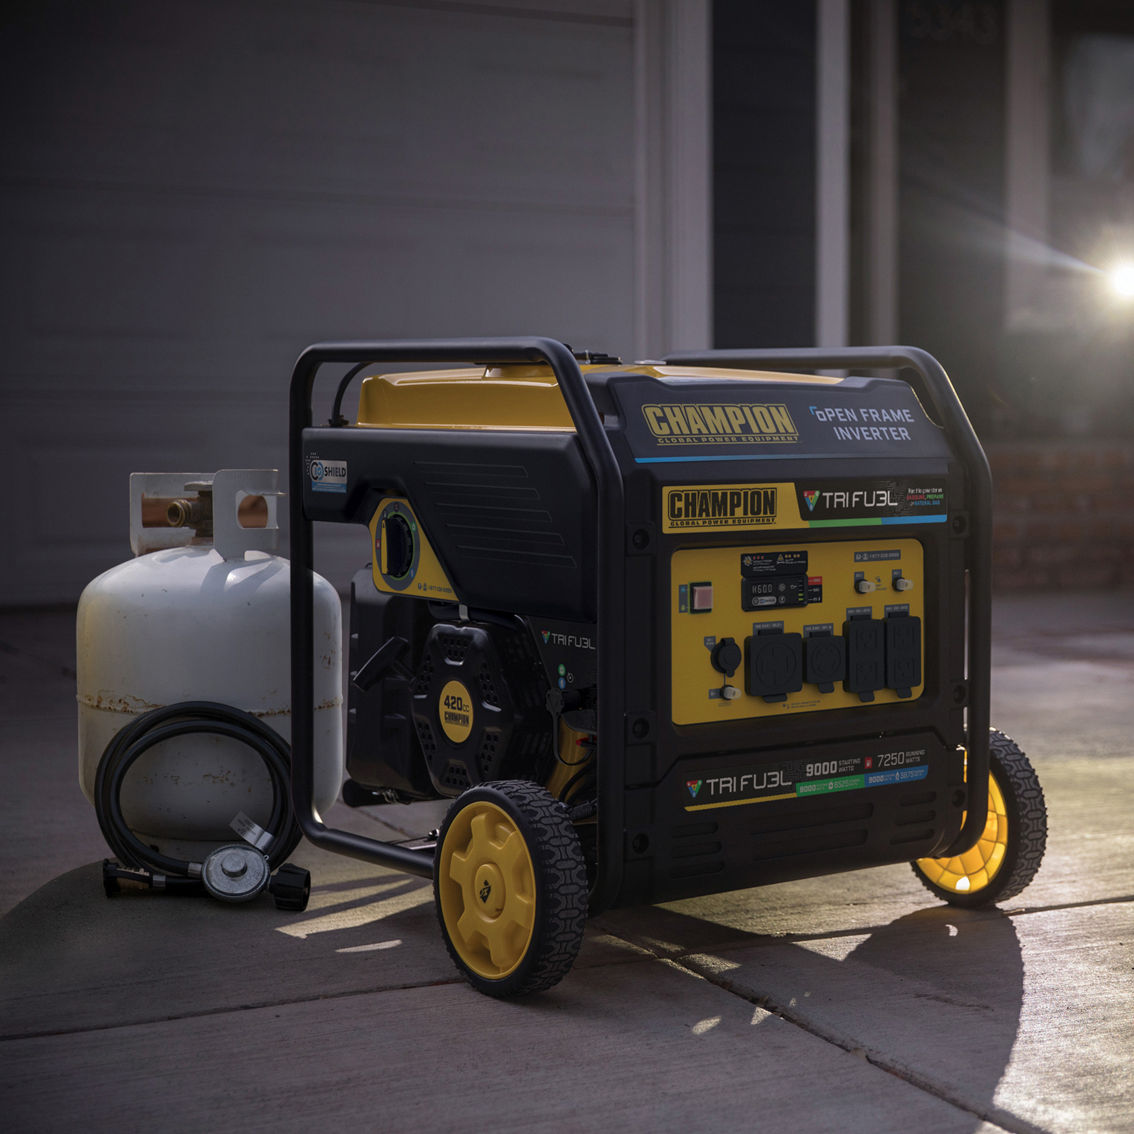 Champion 9000W Tri Fuel Open Frame Inverter Generator with CO Shield - Image 2 of 10